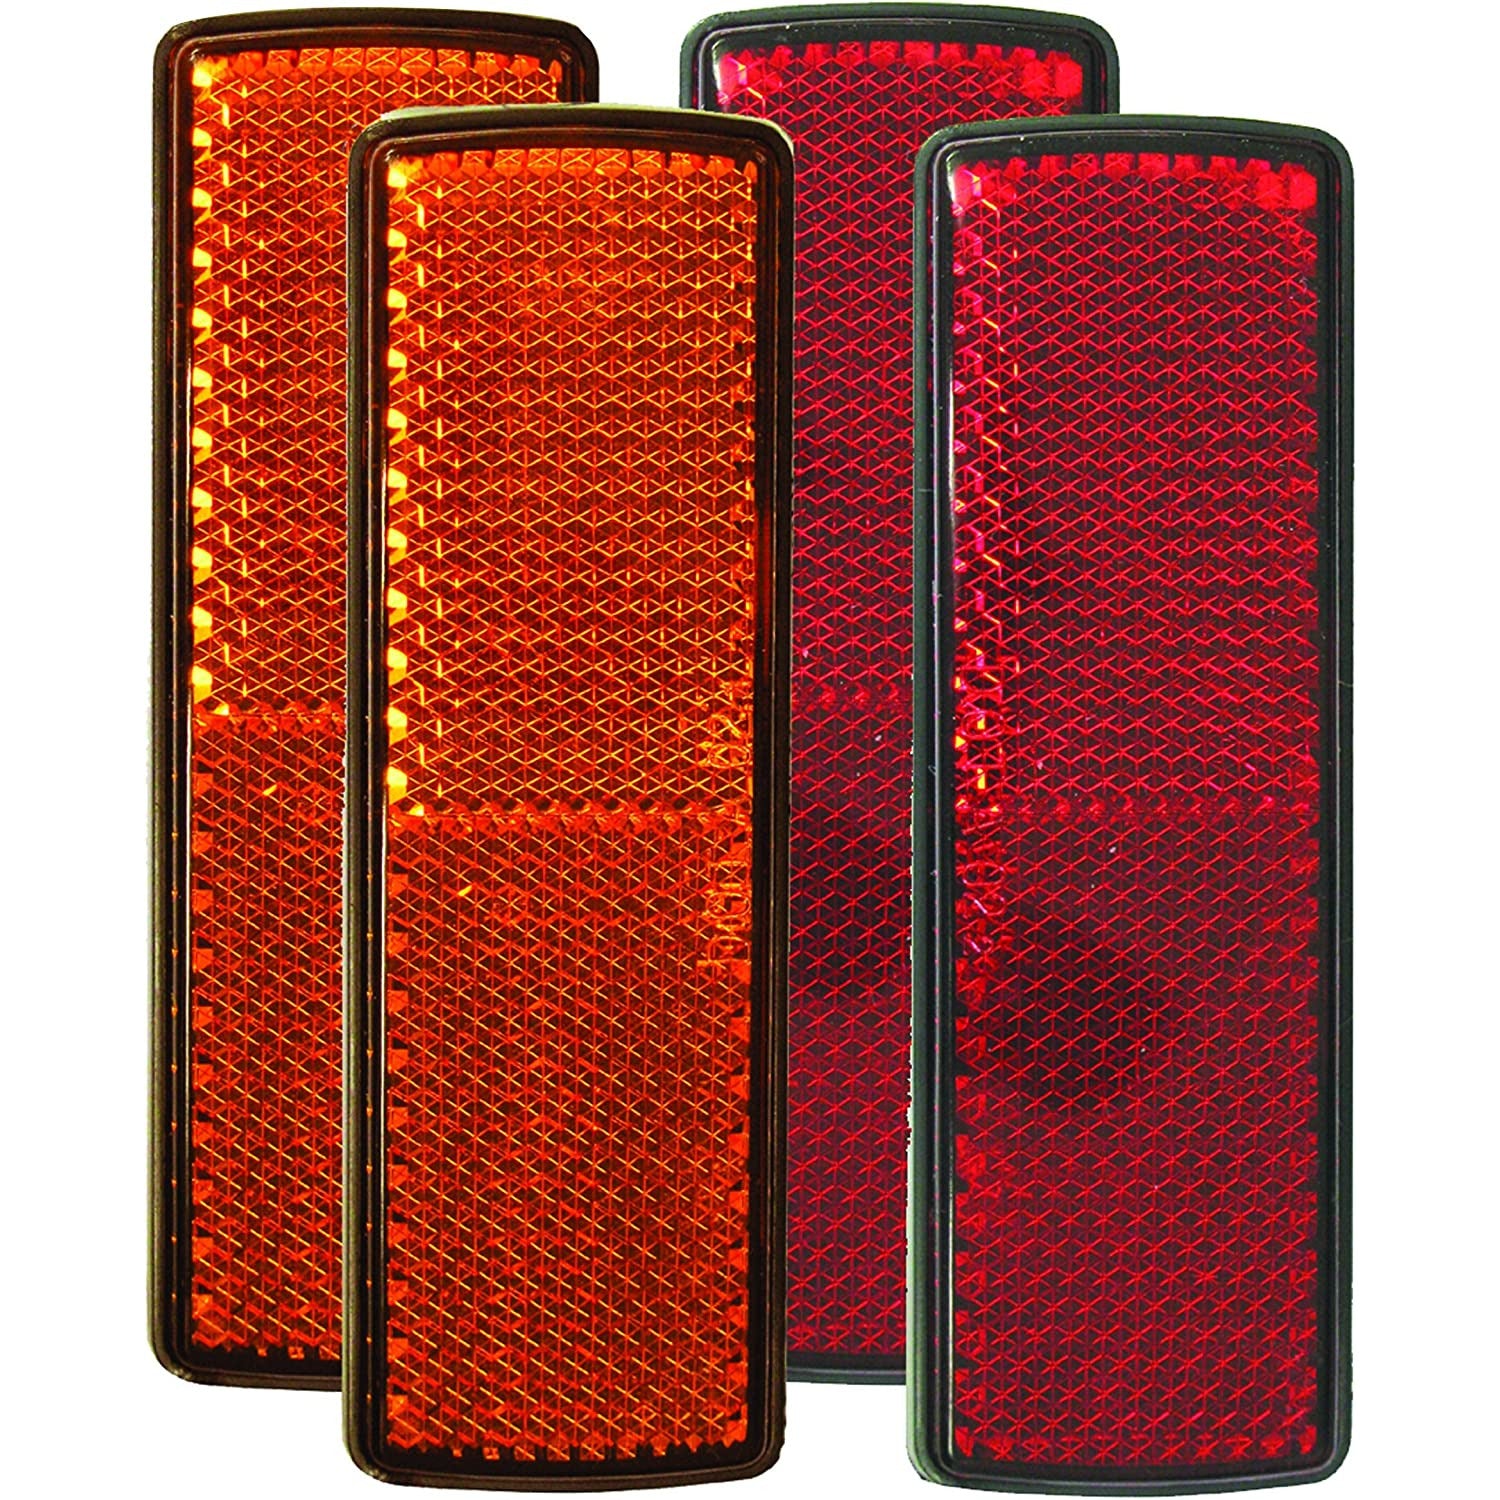 DLT RE52ARK Optronics Reflector Kit (4" Rectangle, Red & Amber, Adhesive, 4pc)